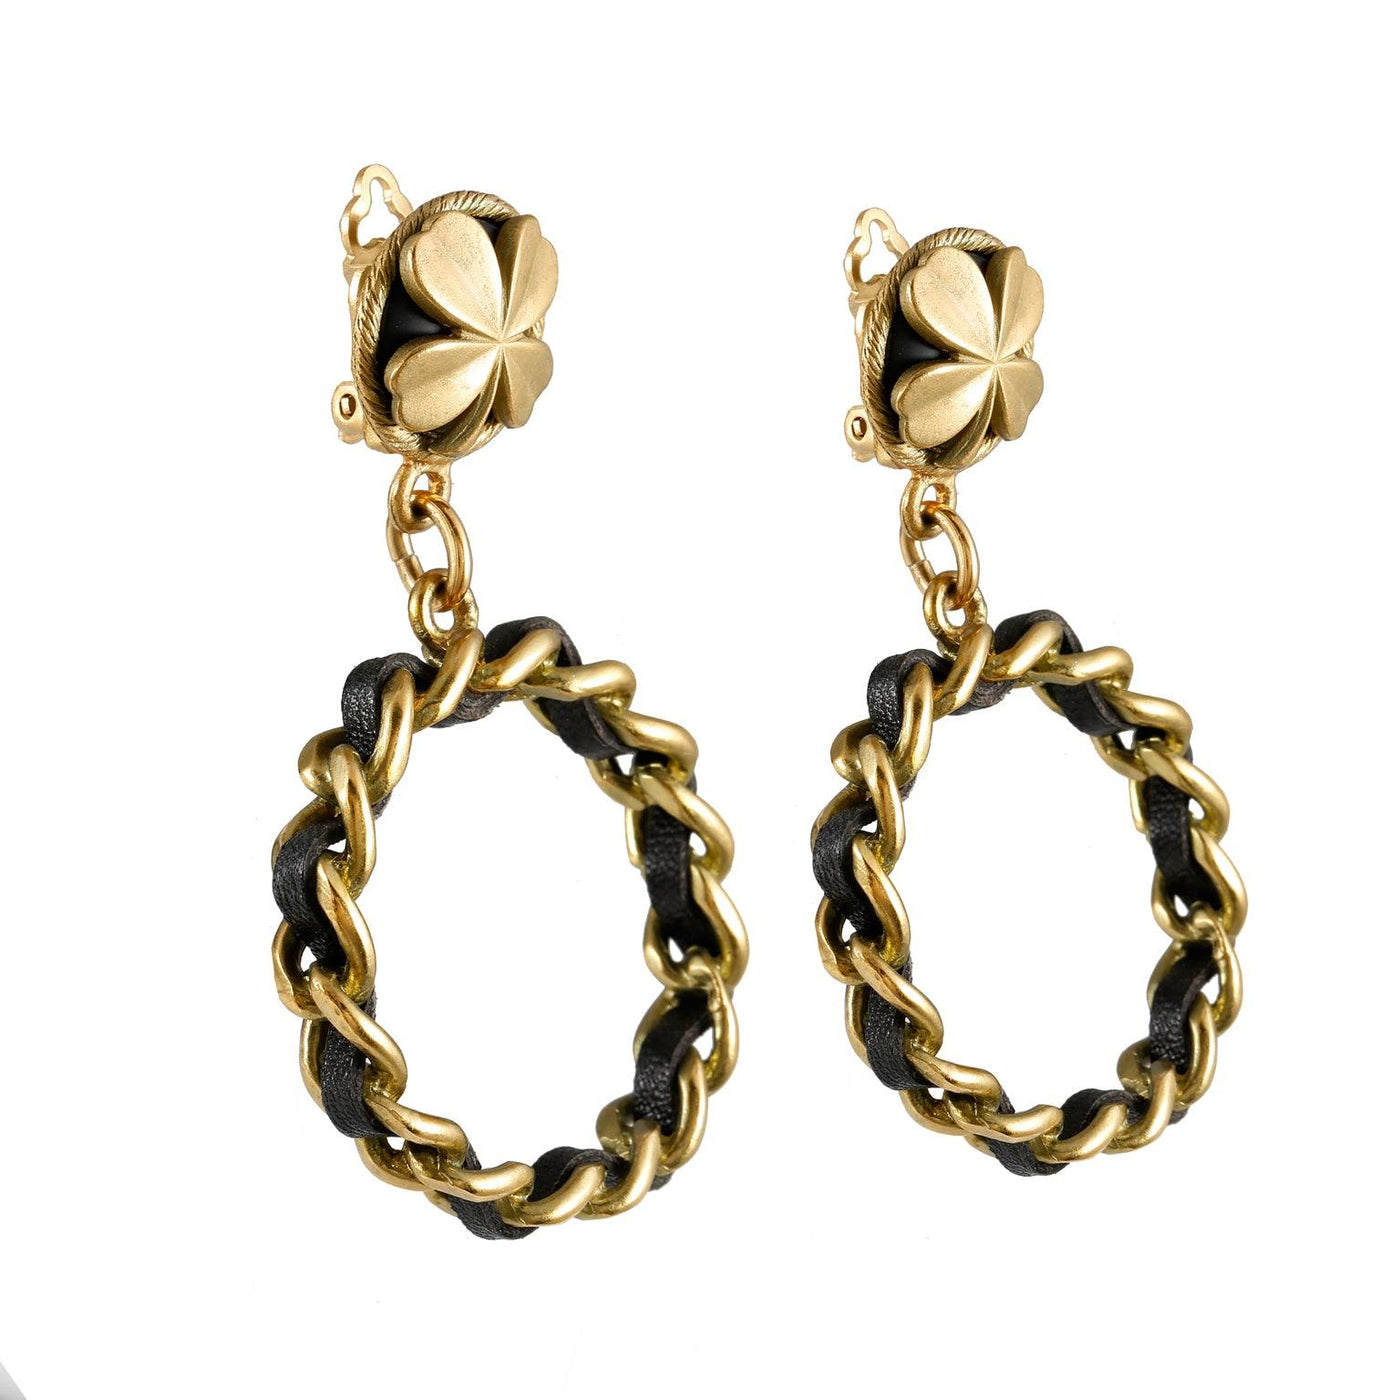 Chanel Black Leather and Gold Chain Dangling Hoop Earrings - Only Authentics